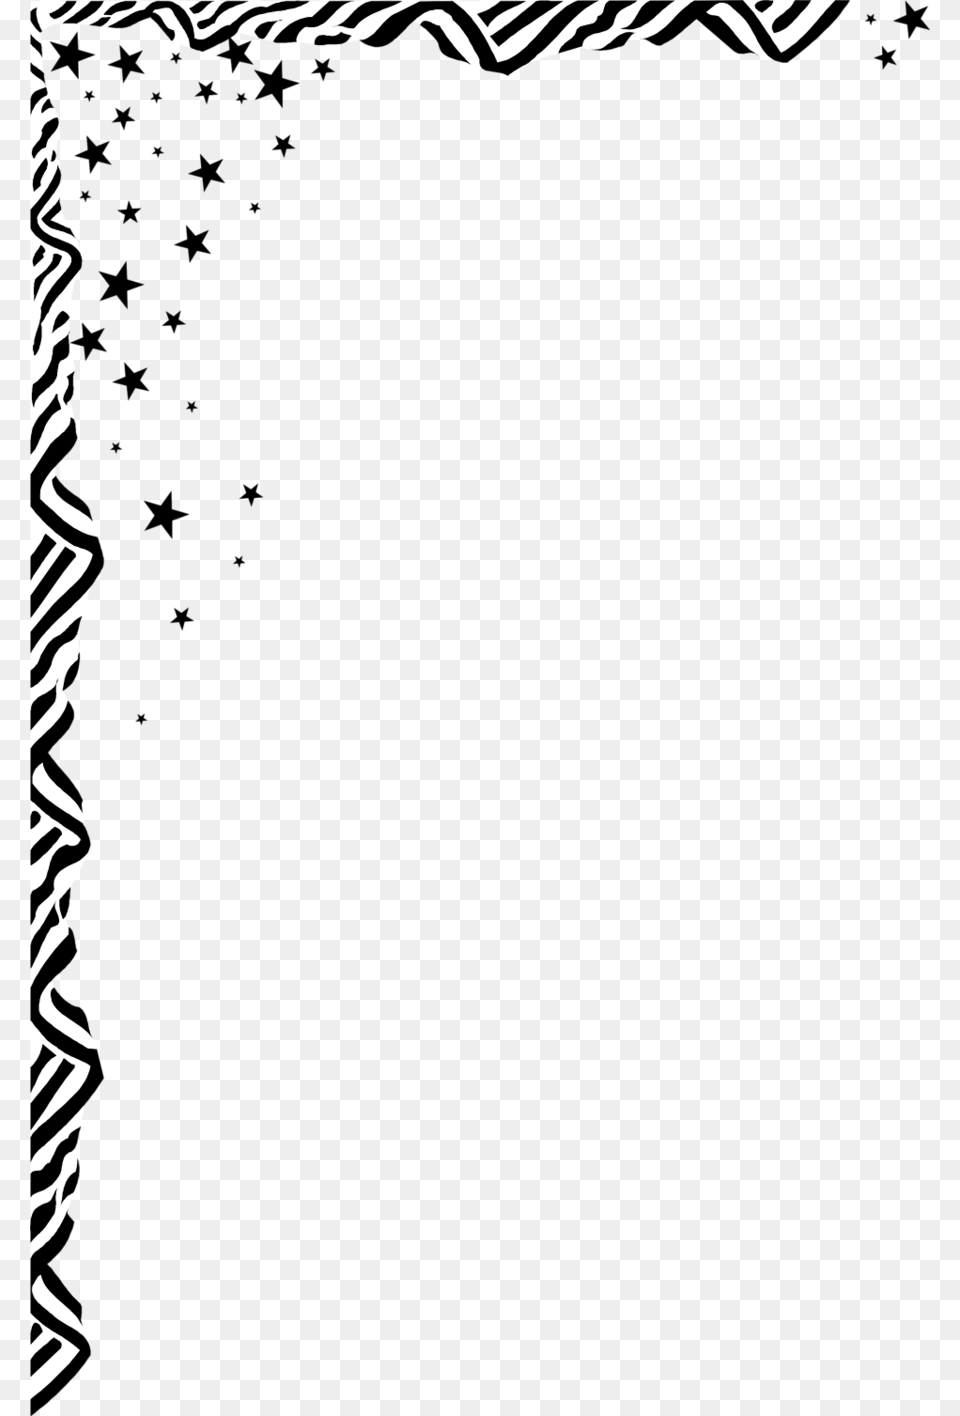 Download Frames Black And White Stars Clipart Borders And Frames, Home Decor, Cushion, Animal, Mammal Png